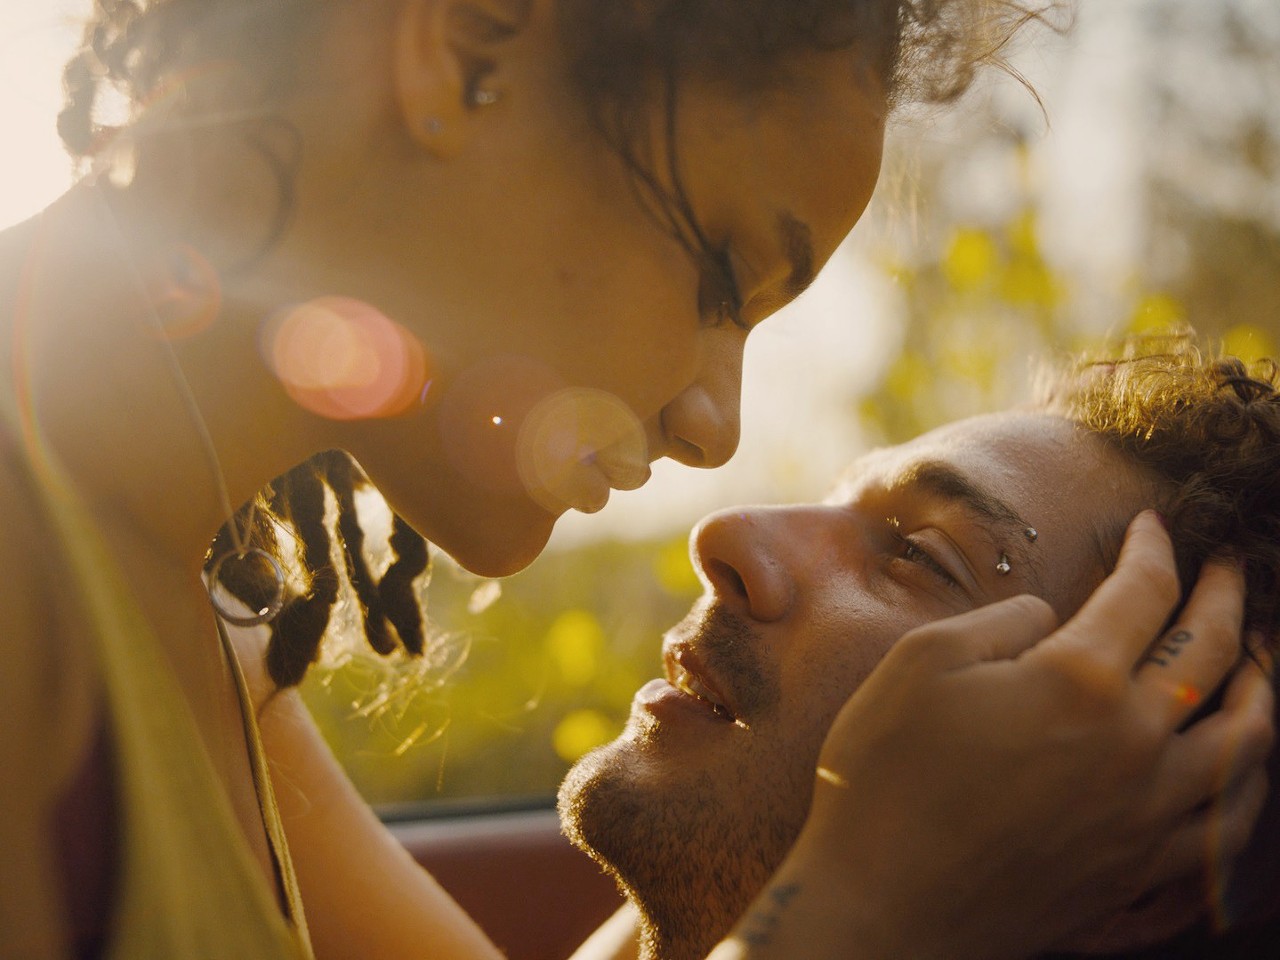 american honey movie review rotten tomatoes